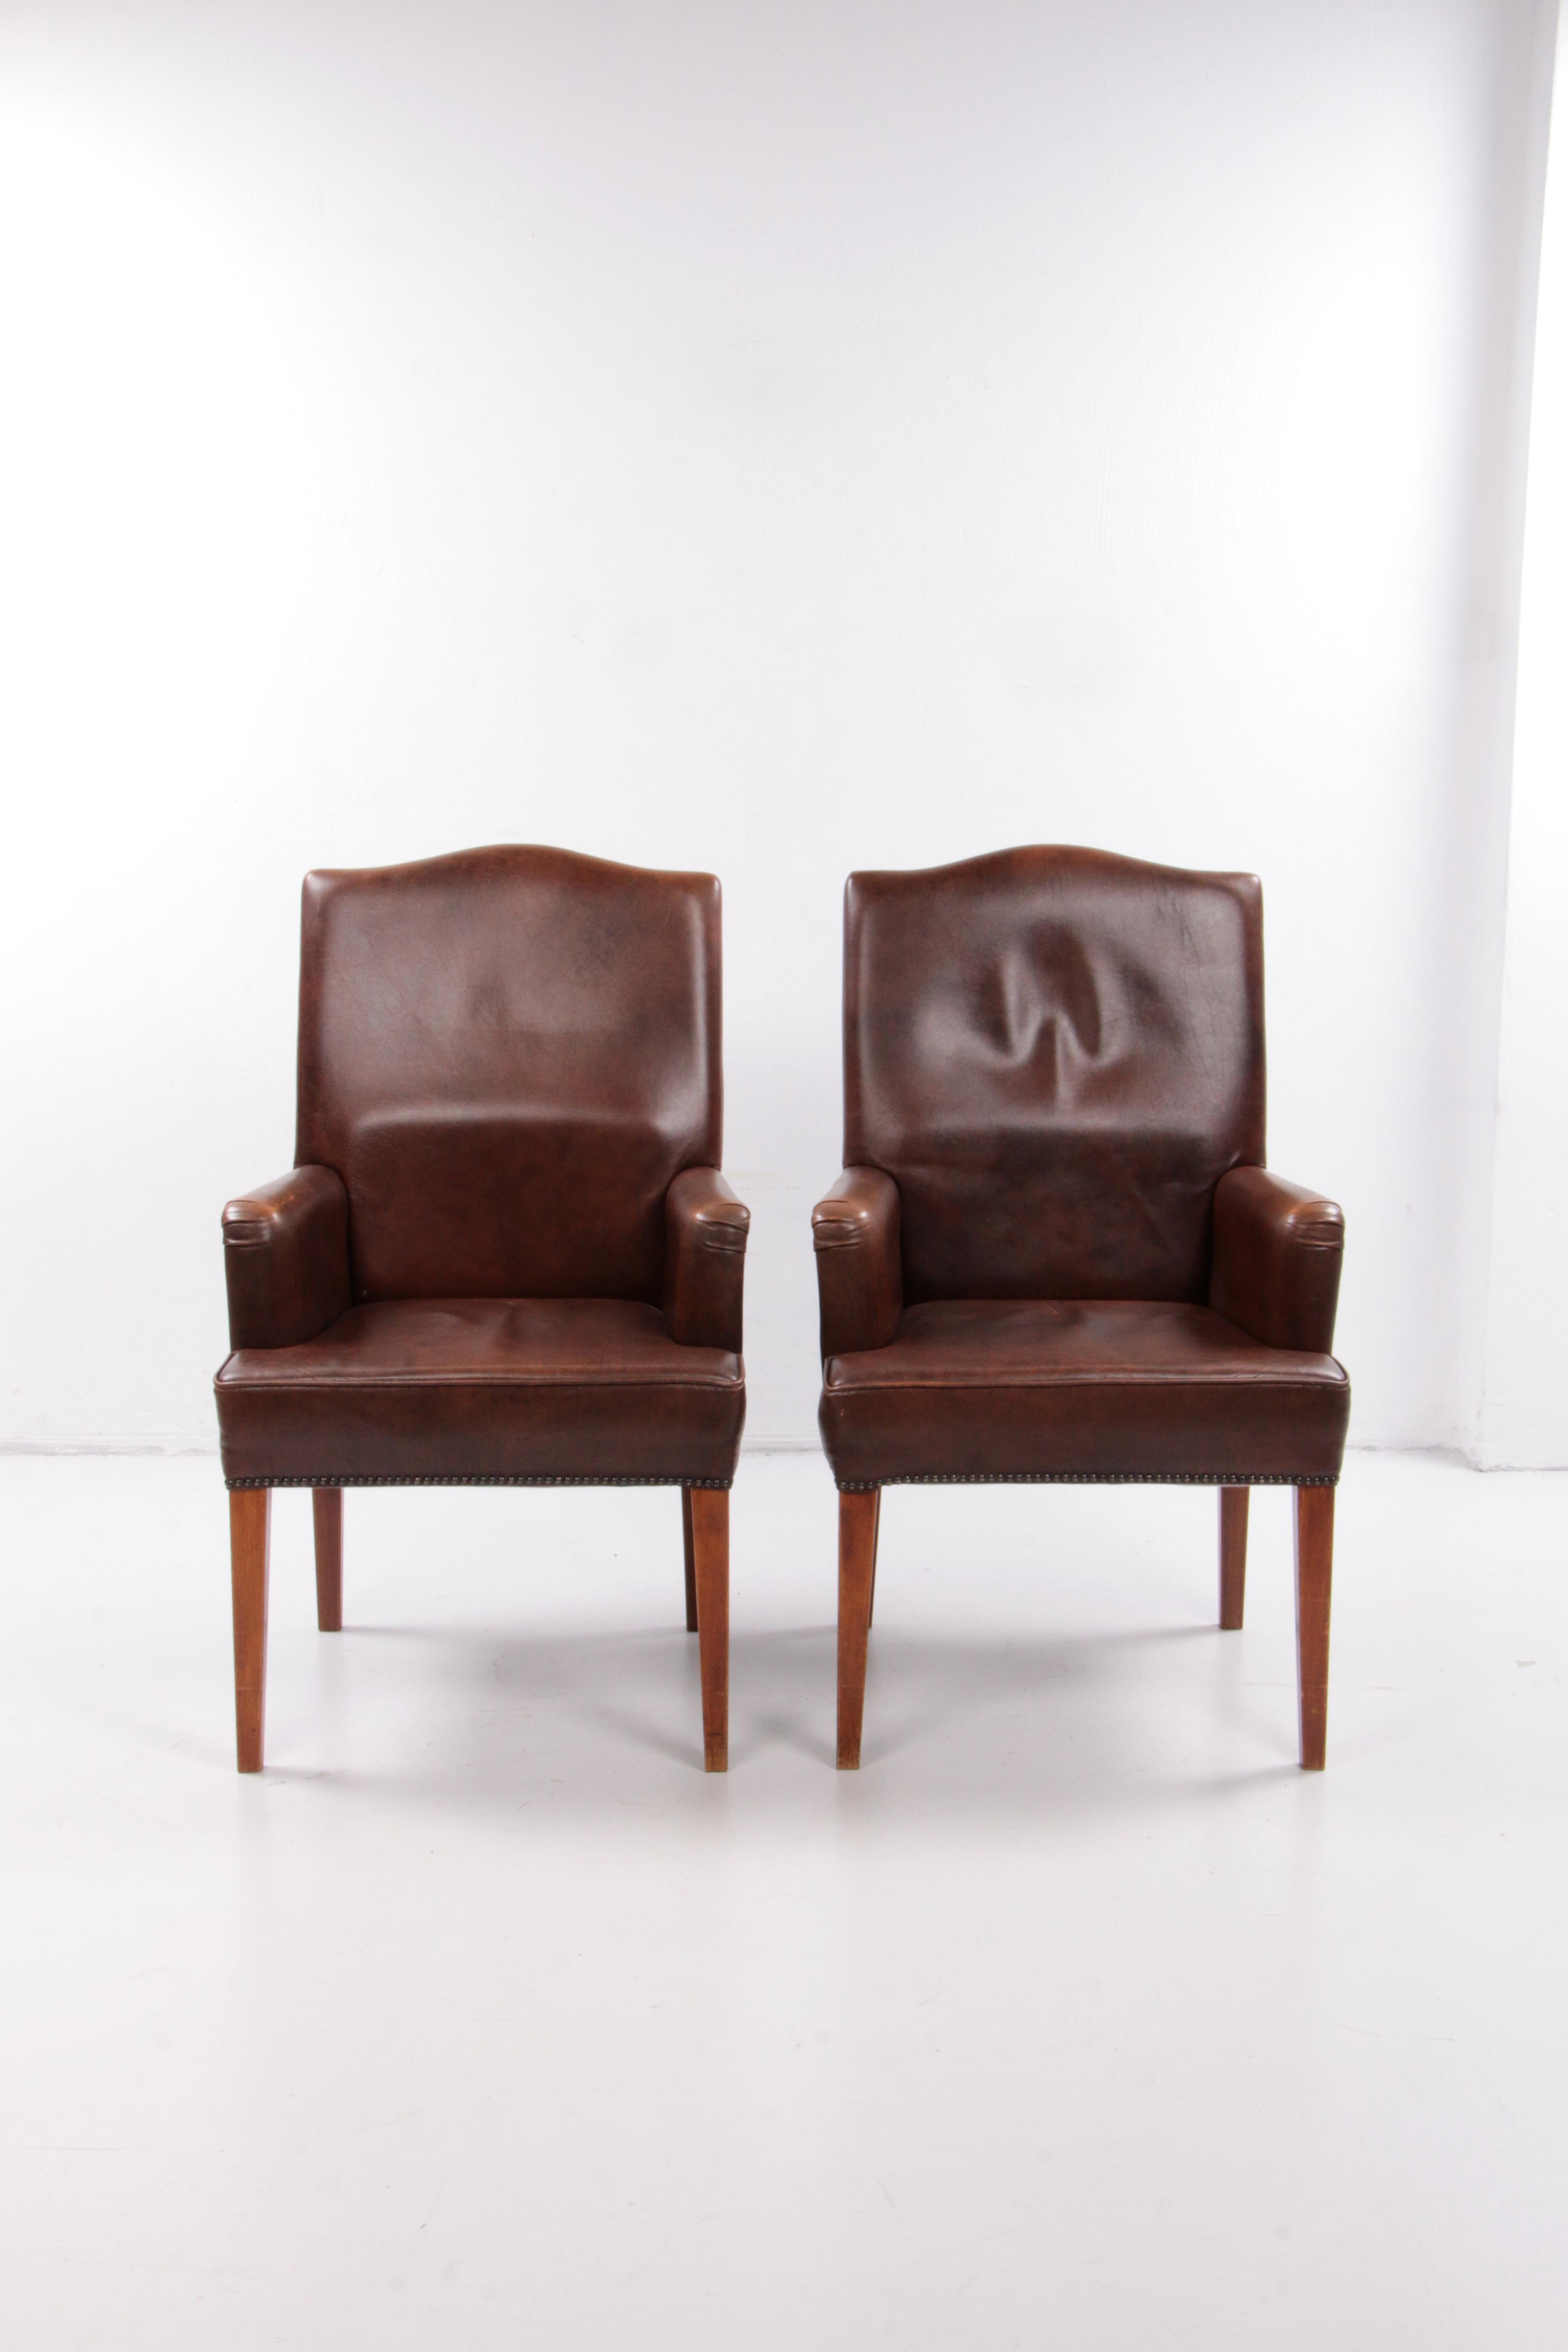 Mid-Century Modern Set of 2 dining room chairs in sheep leather, 1970 Netherlands. For Sale